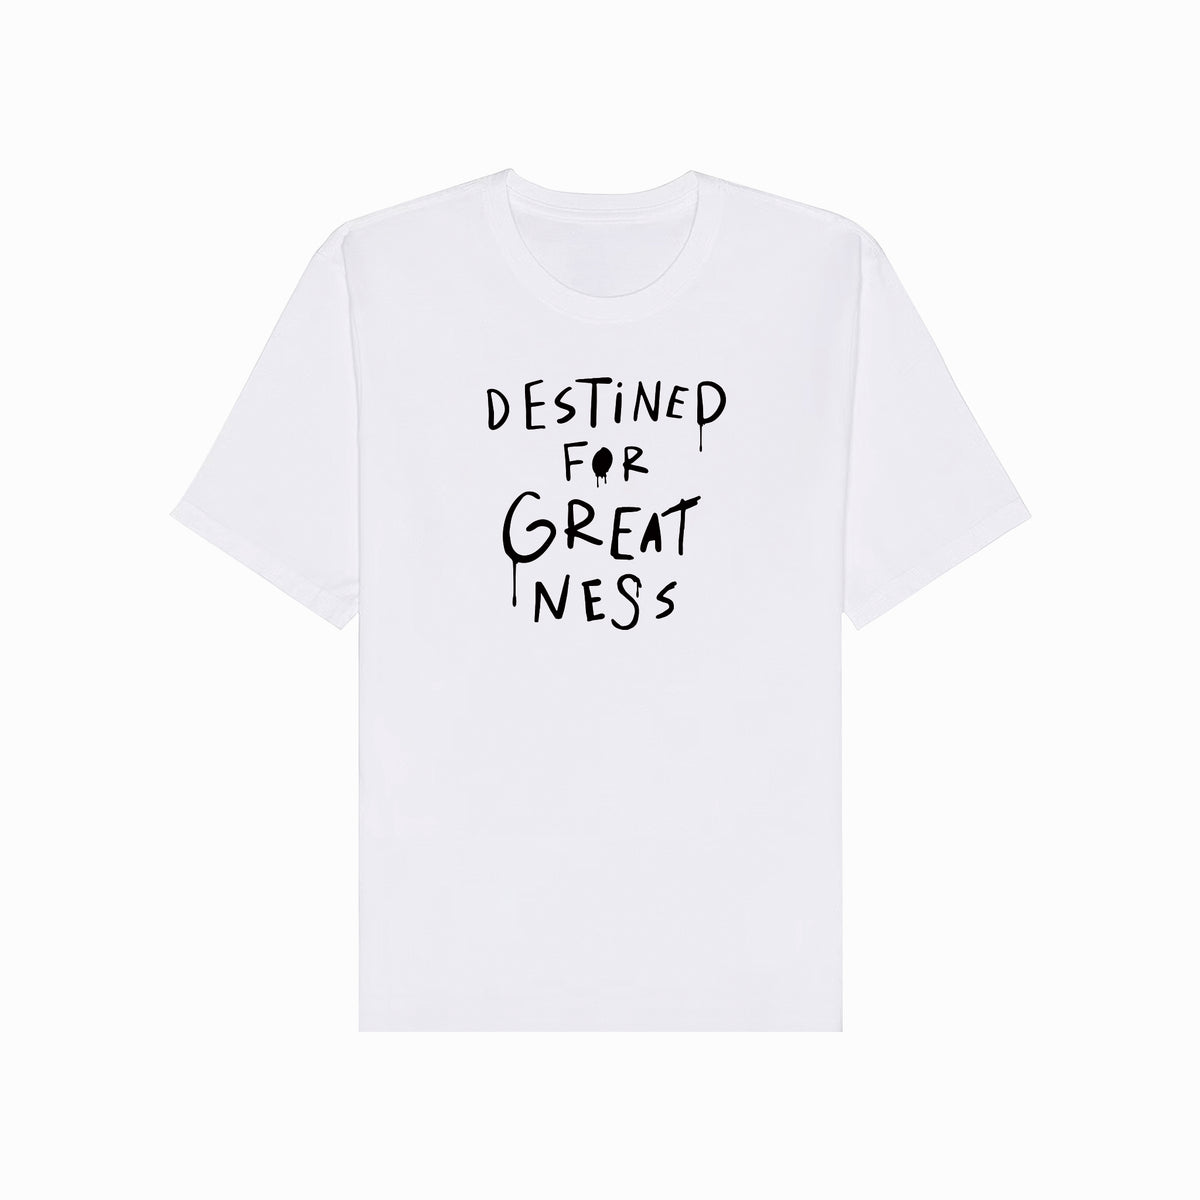 Destined for Greatness white tshirt